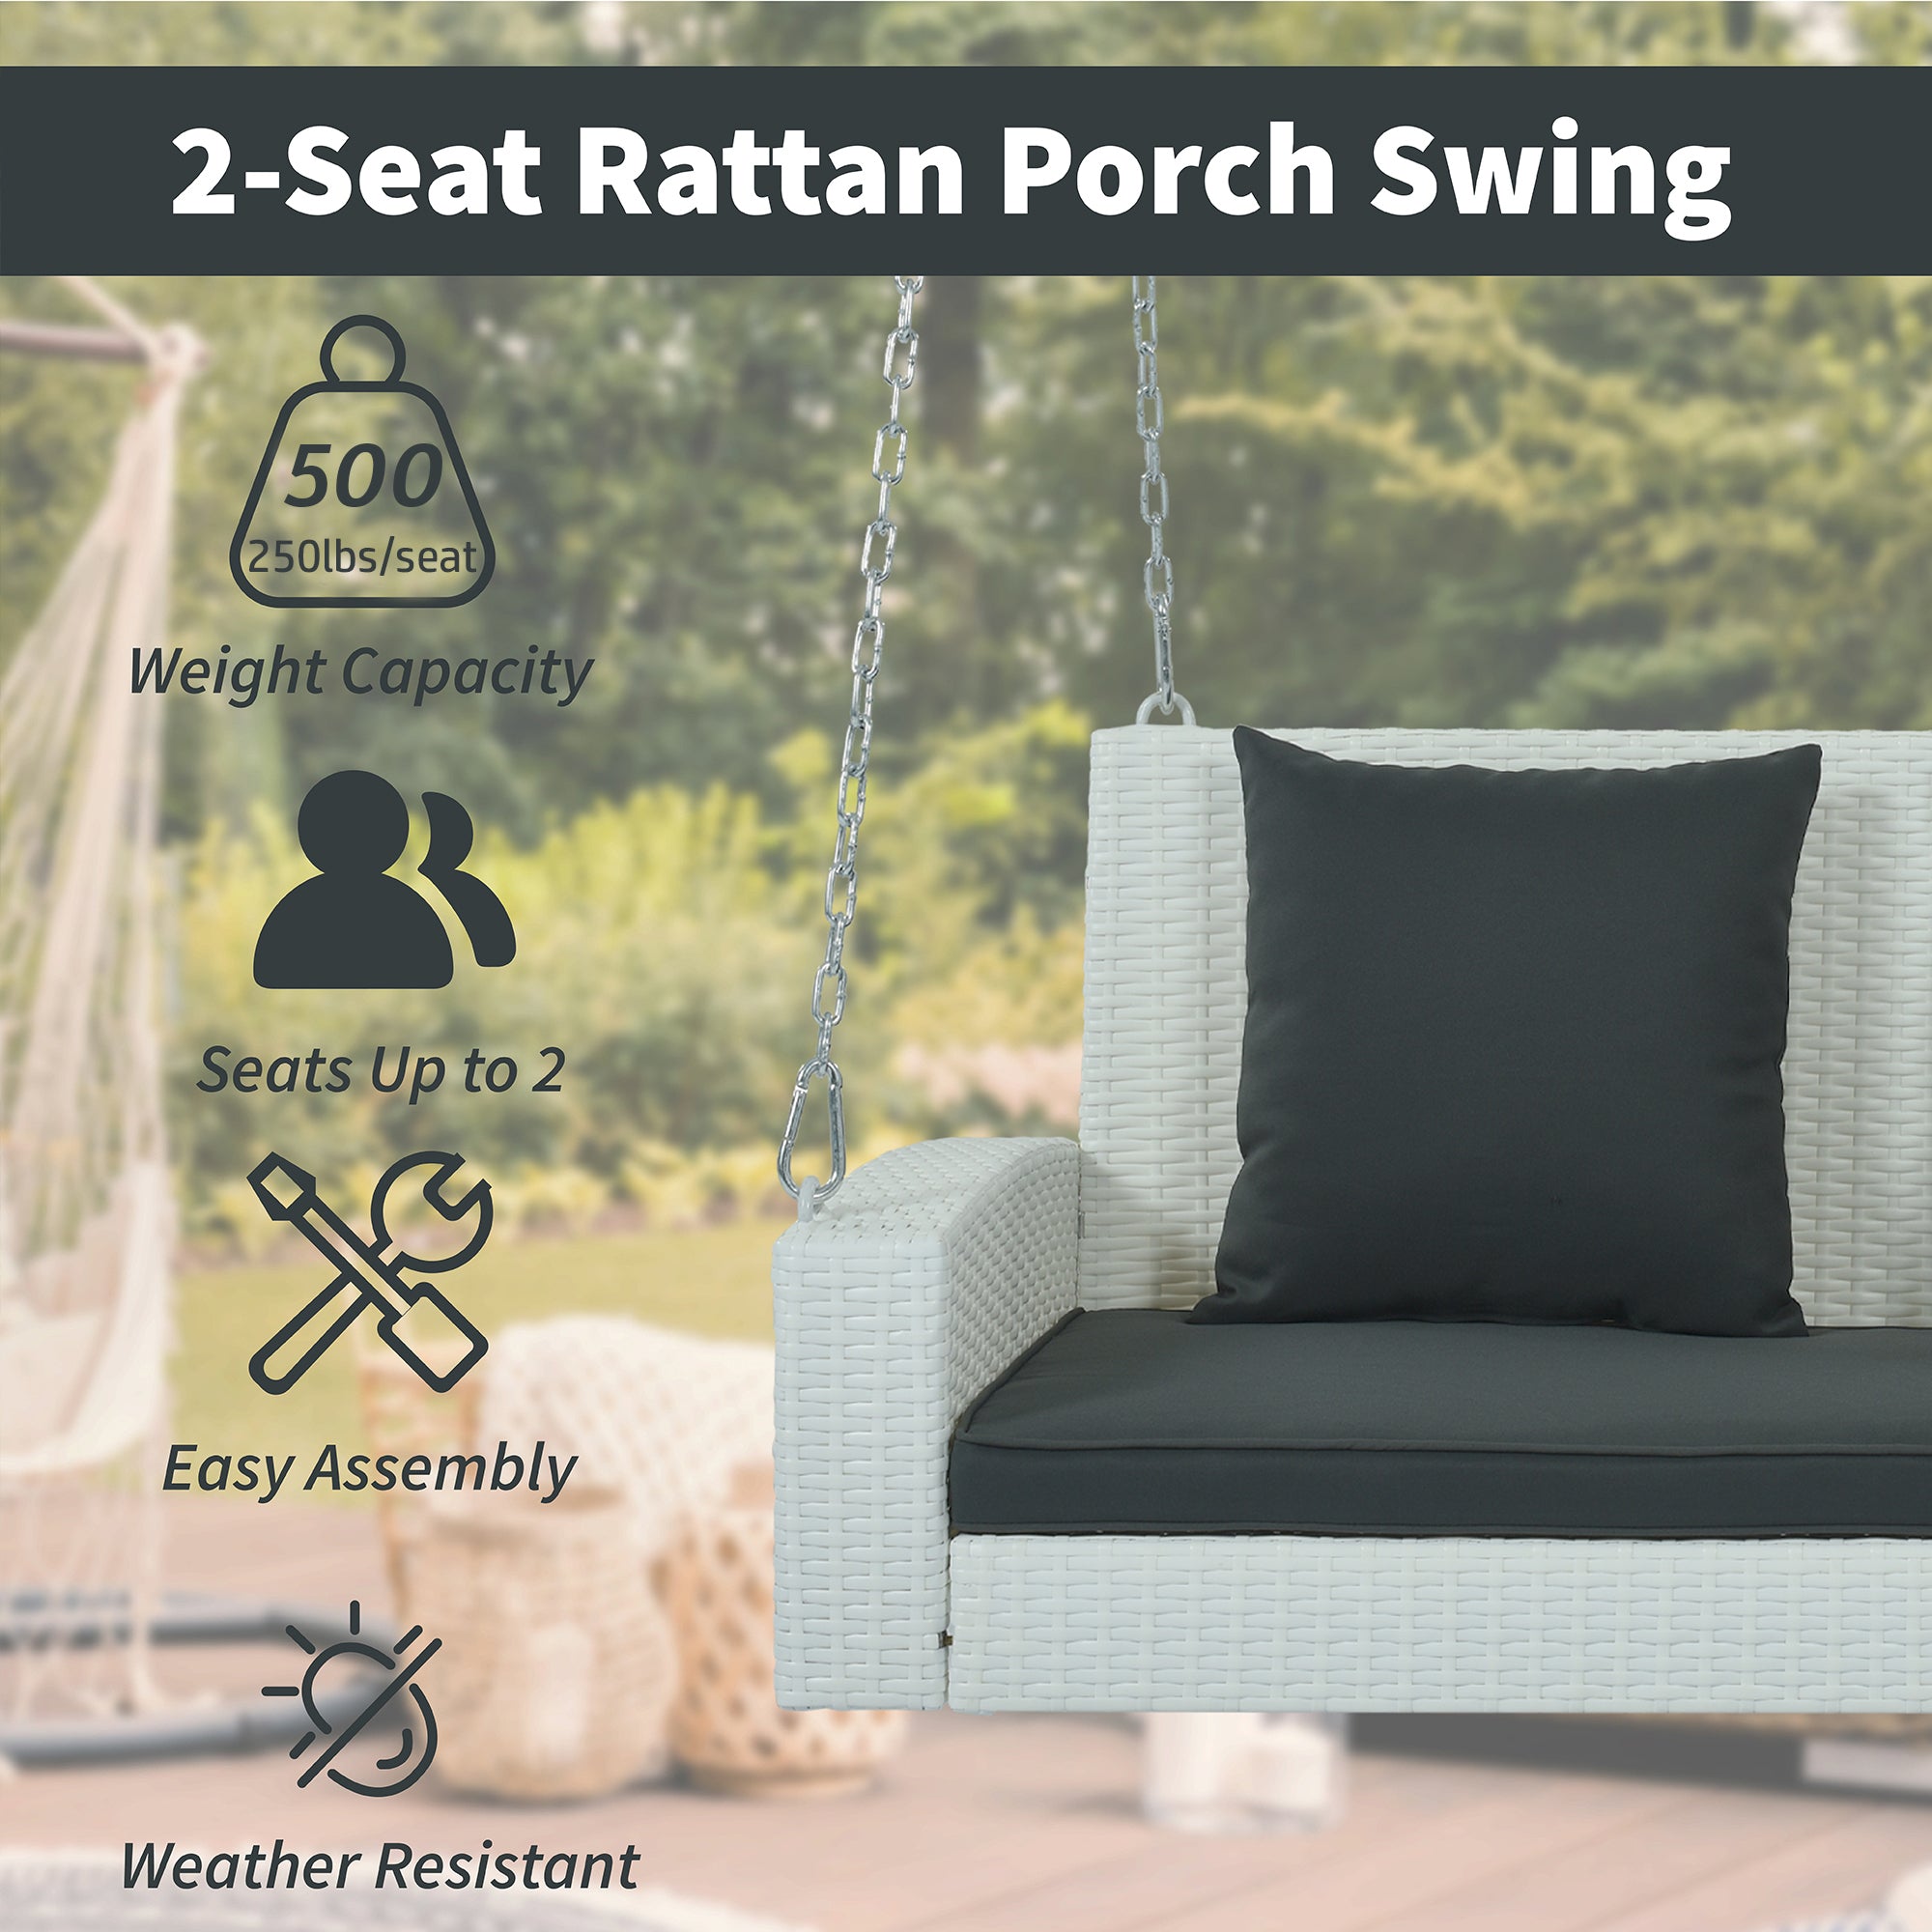 2-Person Wicker Hanging Porch Swing with Chains, Cushion, Pillow, Rattan Swing Bench for Garden, Backyard, Pond. (White Wicker, Gray Cushion)